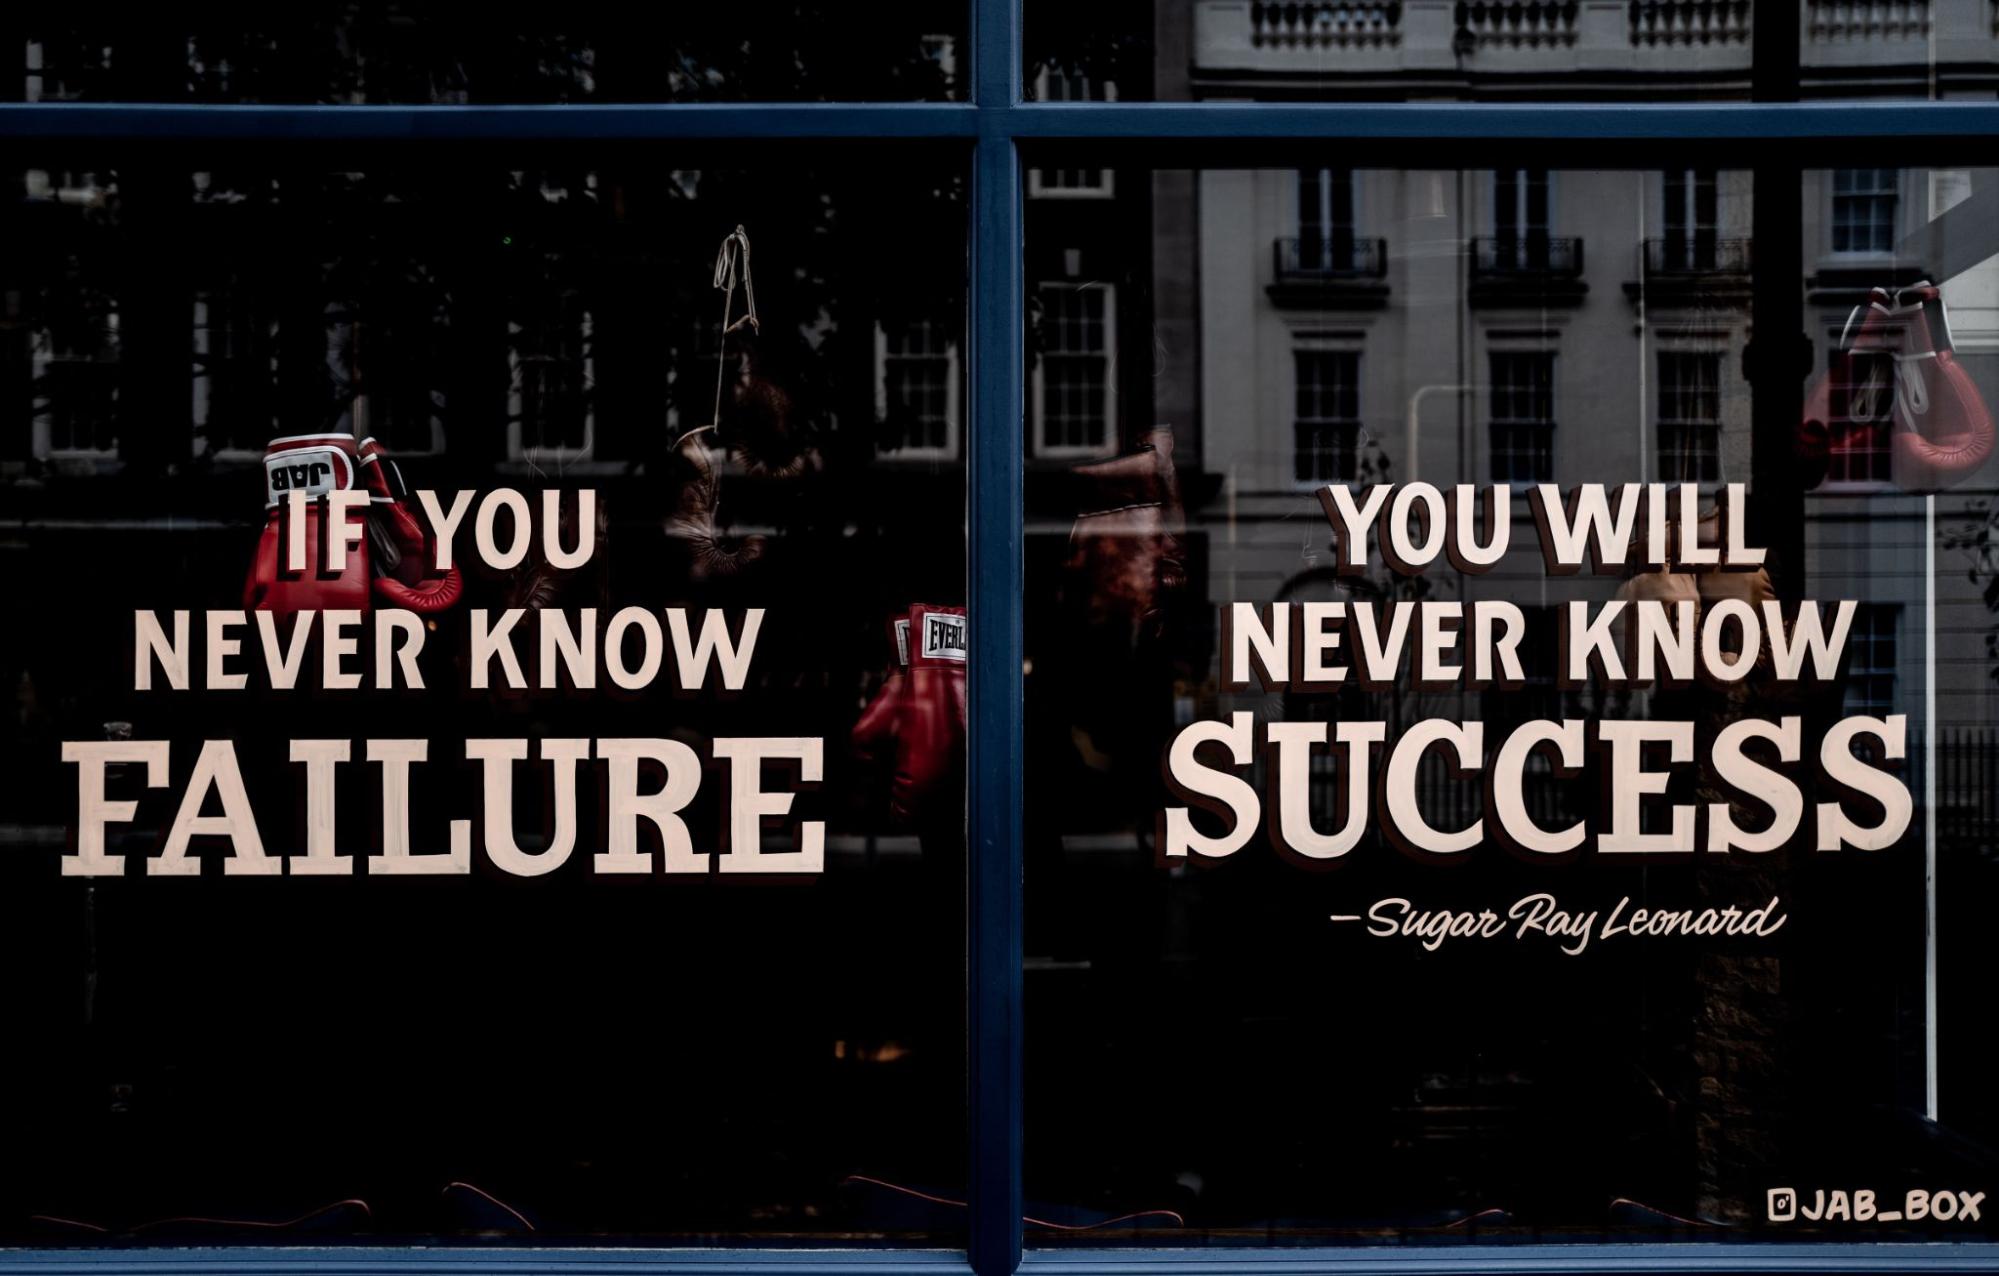 Boxing gym’s window display with “If you never know failure, you will never know defeat,” by Sugar Ray Leonard 